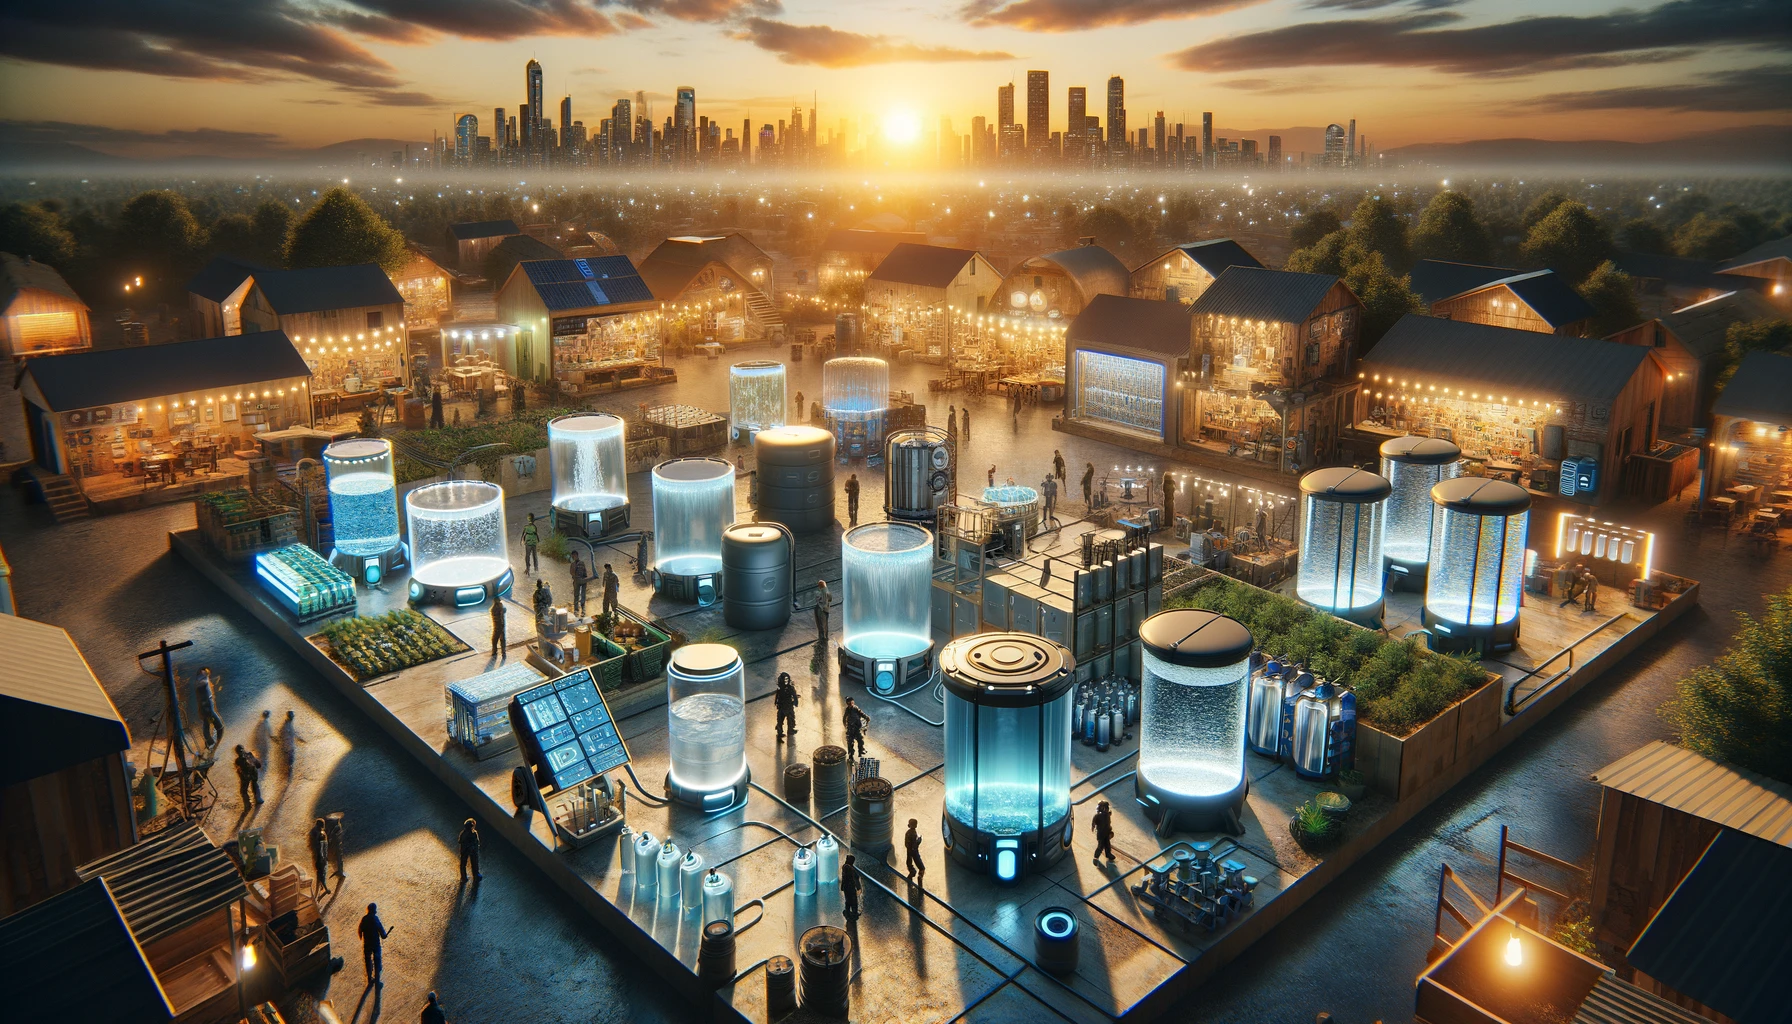 Futuristic survival community with innovative water storage solutions, including collapsible tanks, smart tanks with purity sensors, and efficient rainwater systems, amidst a diverse, active populace under the warm glow of sunset, symbolizing hope and innovation in water sustainability